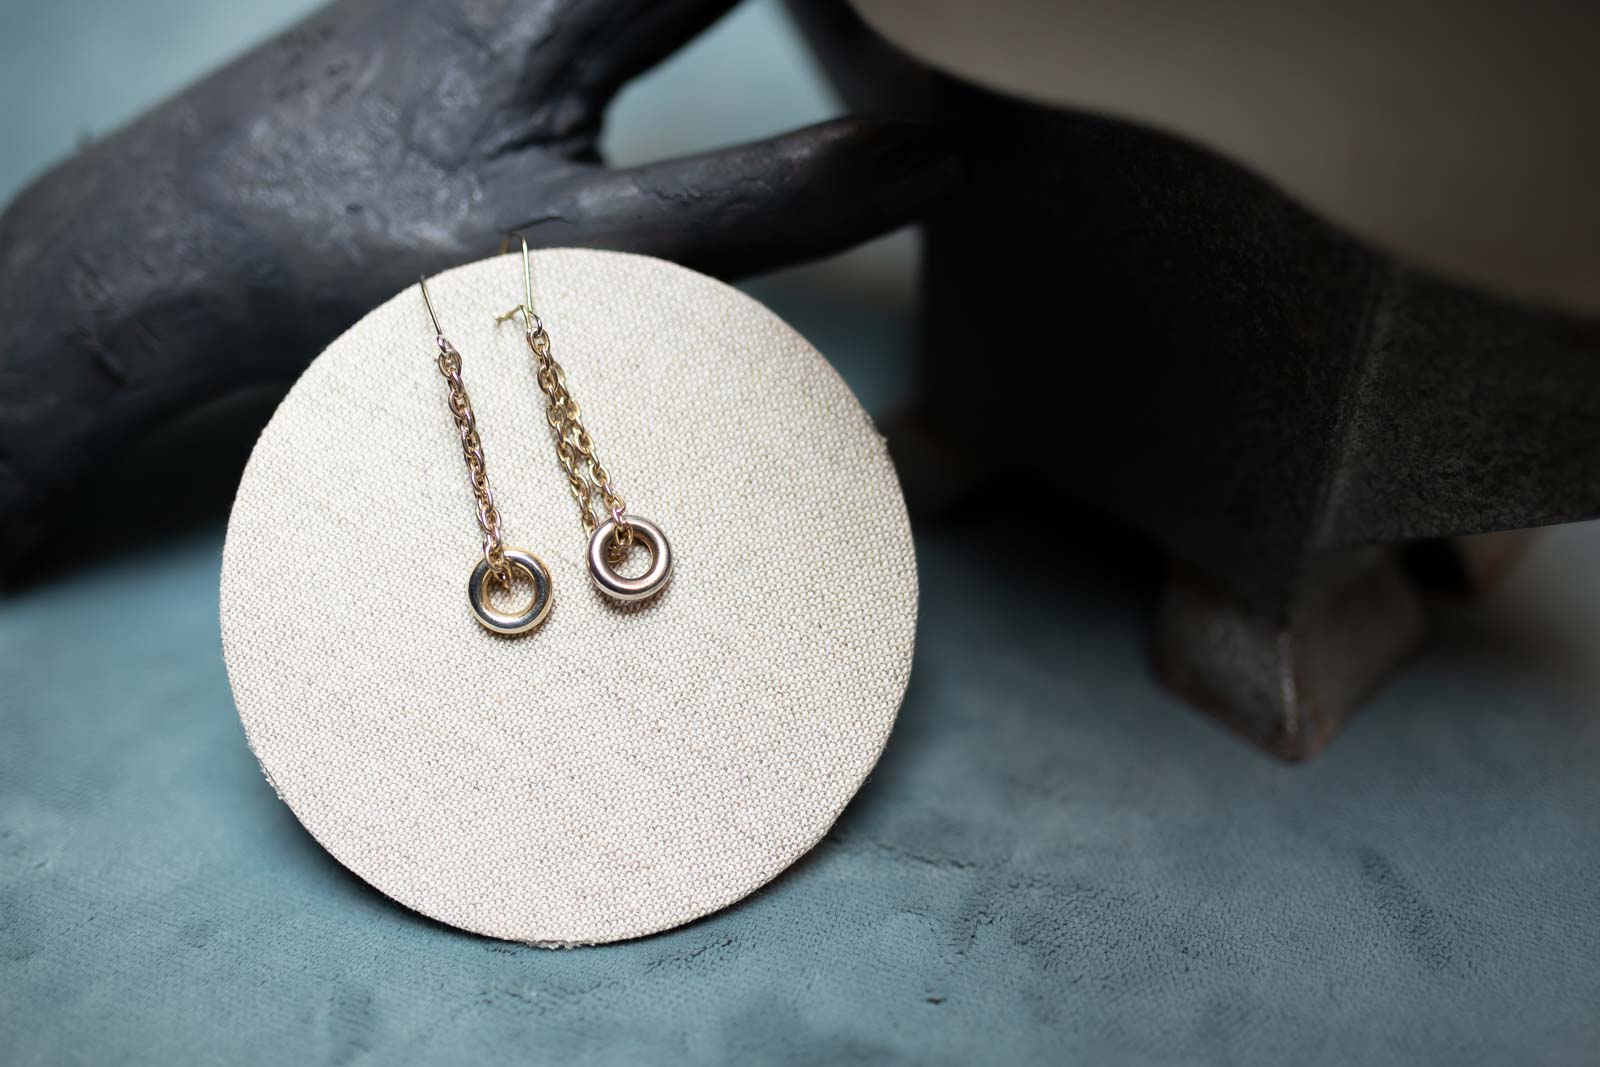 Midlength Chain Earring, looped with circle pendant